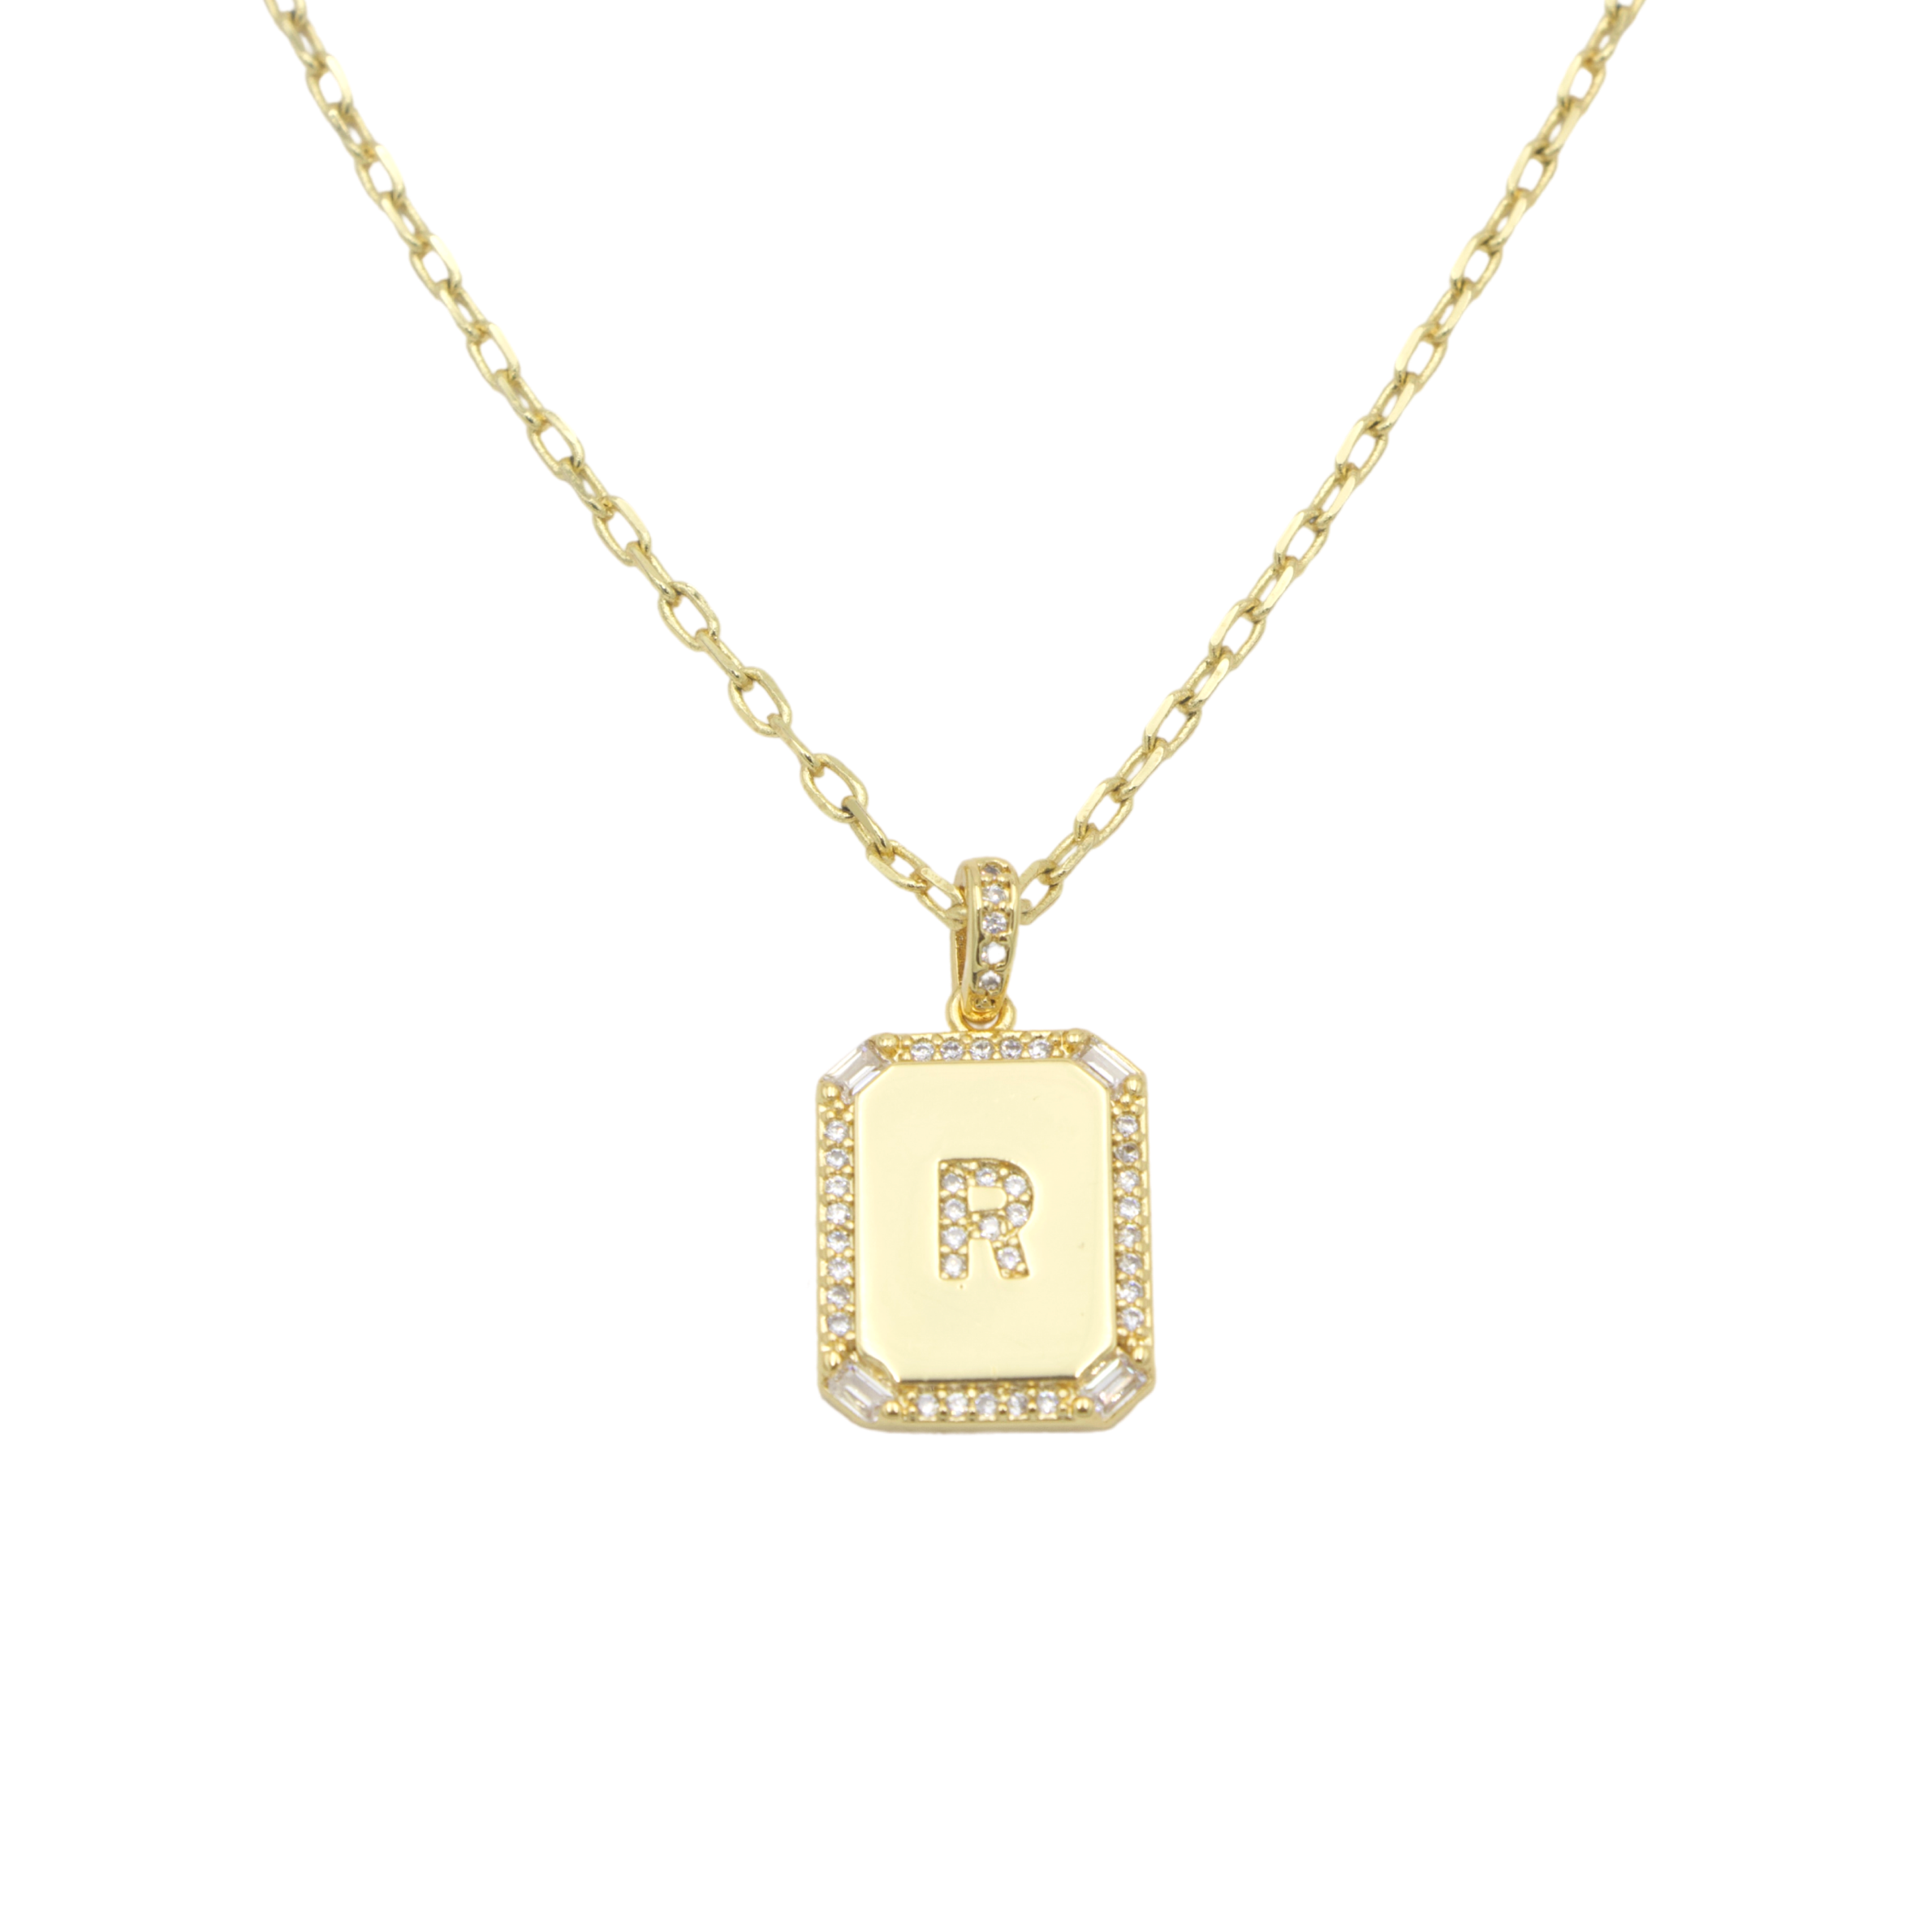 AW Boutique's gold filled 16 inch cable chain necklace finished with a dainty initial pendant with cubic zirconia detail. R initial shown.